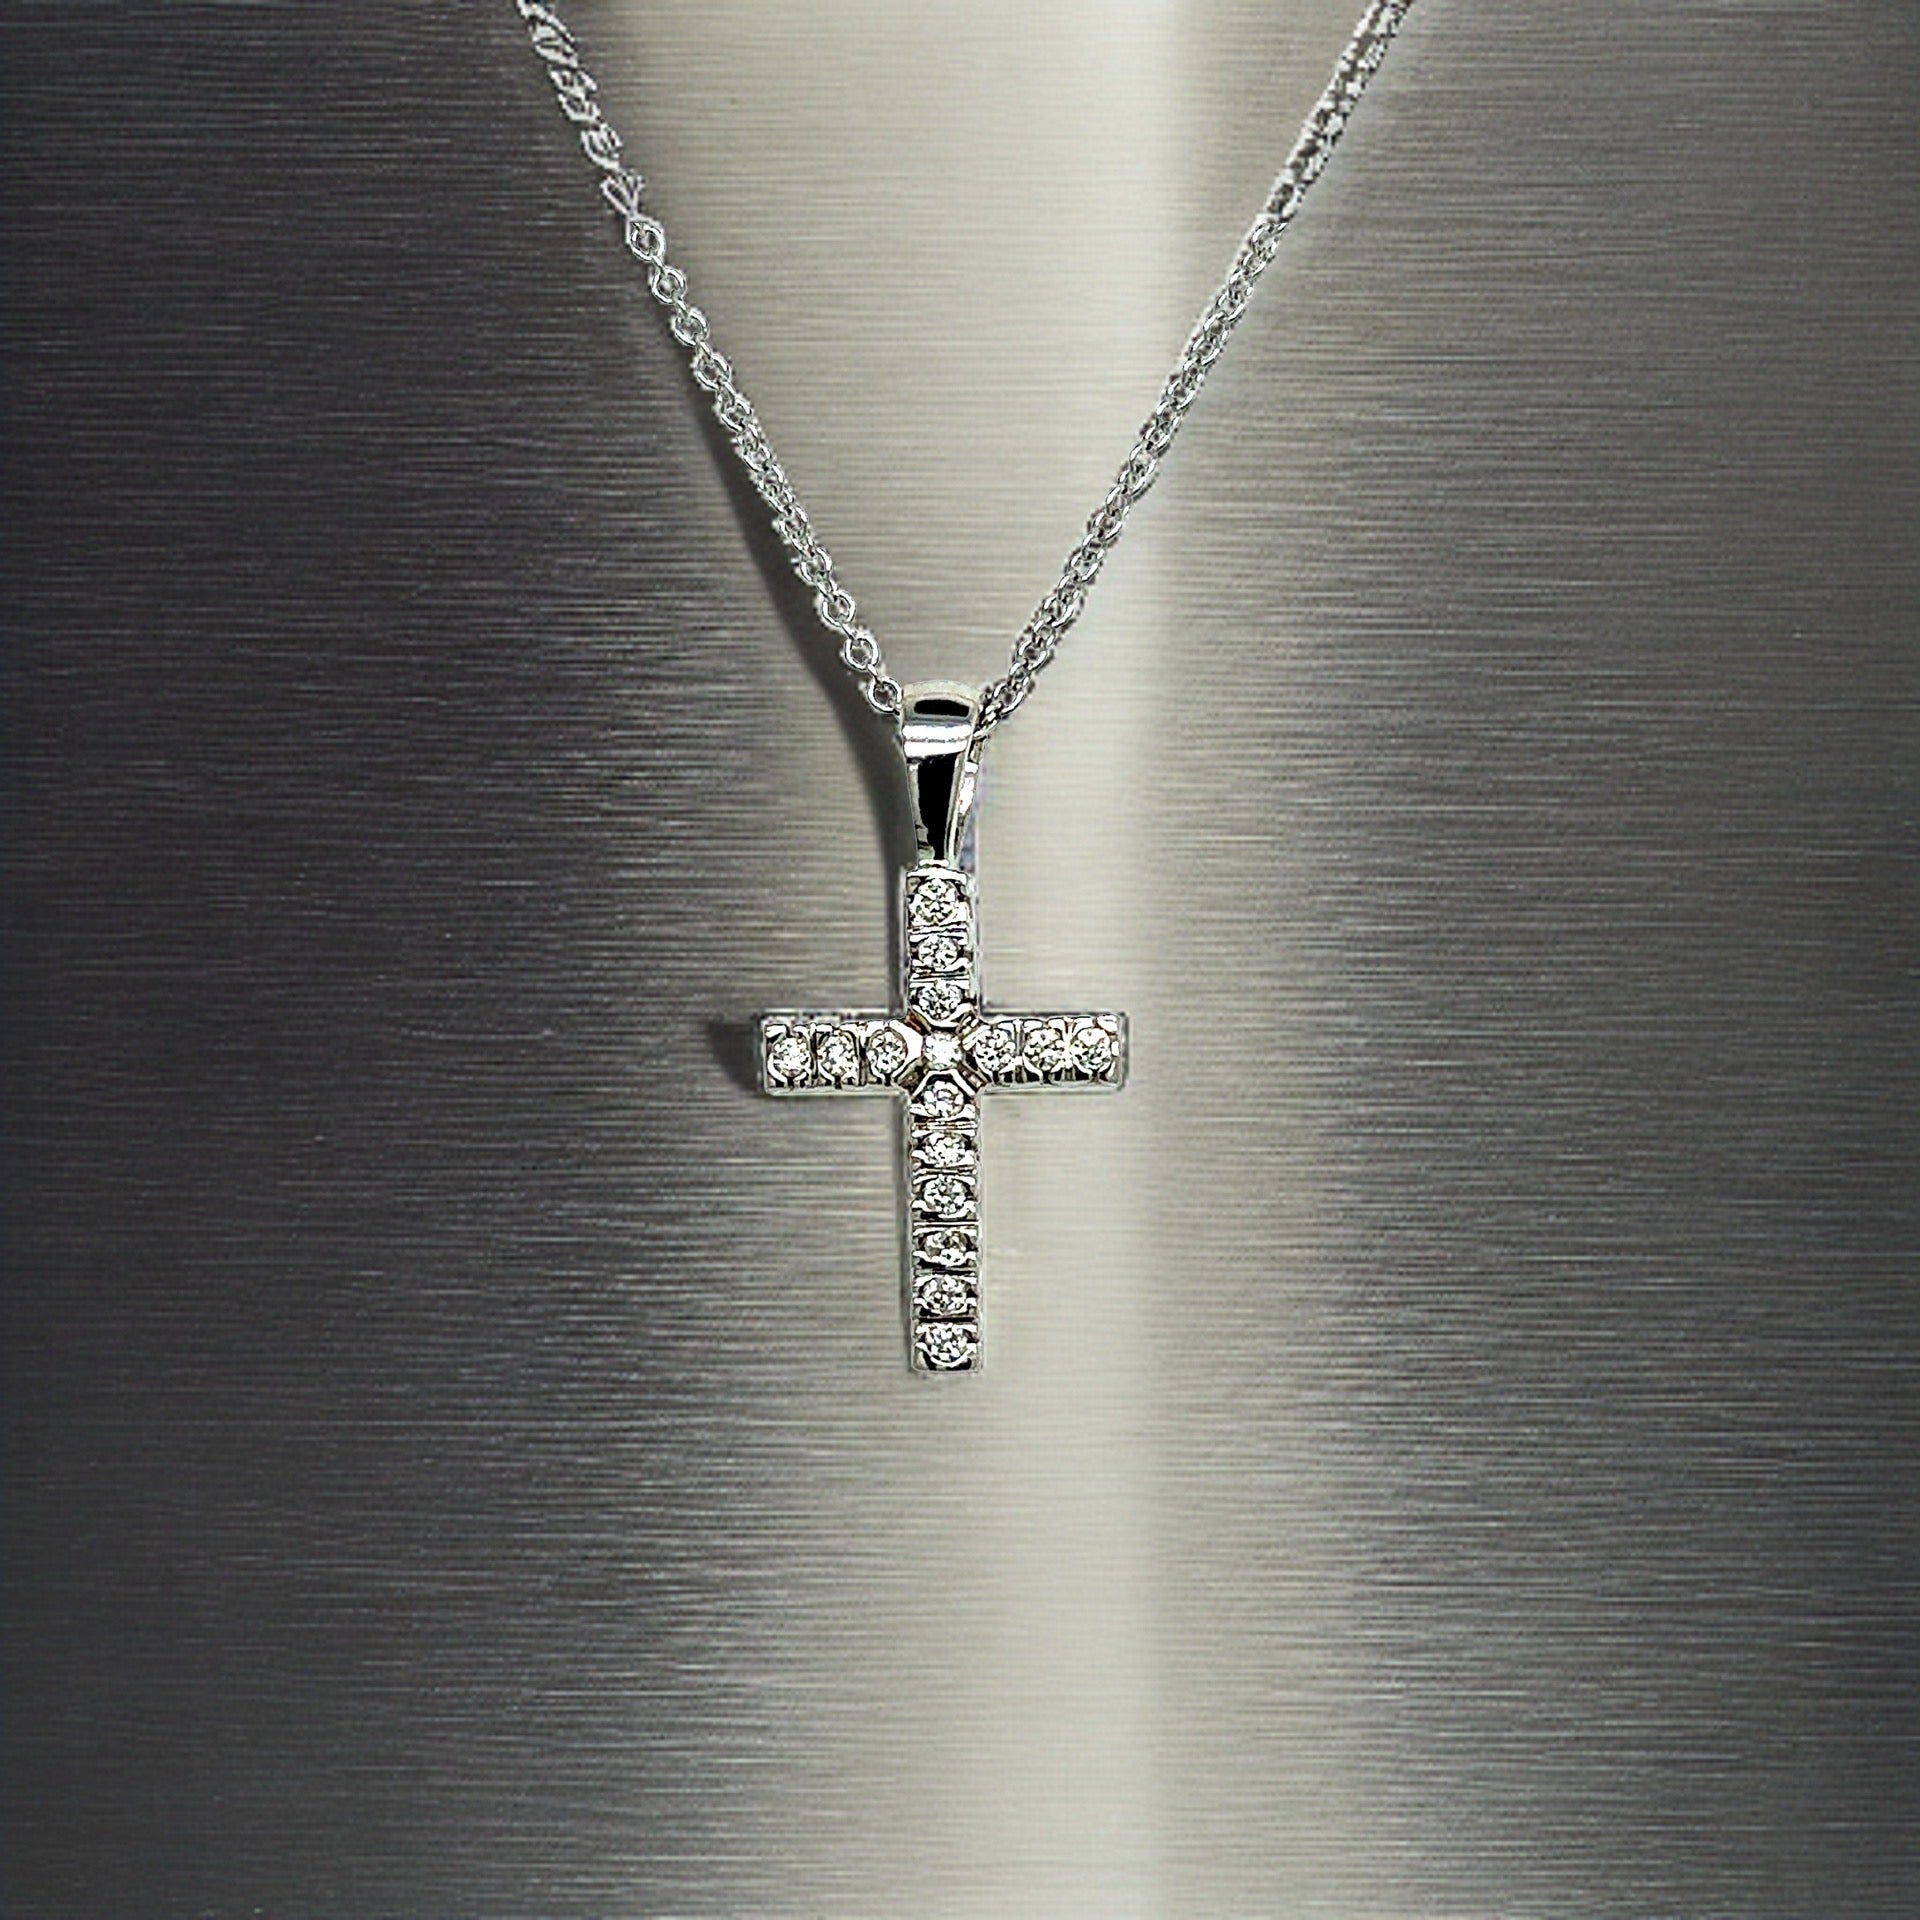 Natural Diamond Cross Pendant with Chain 17" 14k W Gold 0.17 CT Certified $2,490 307920 - Certified Fine Jewelry